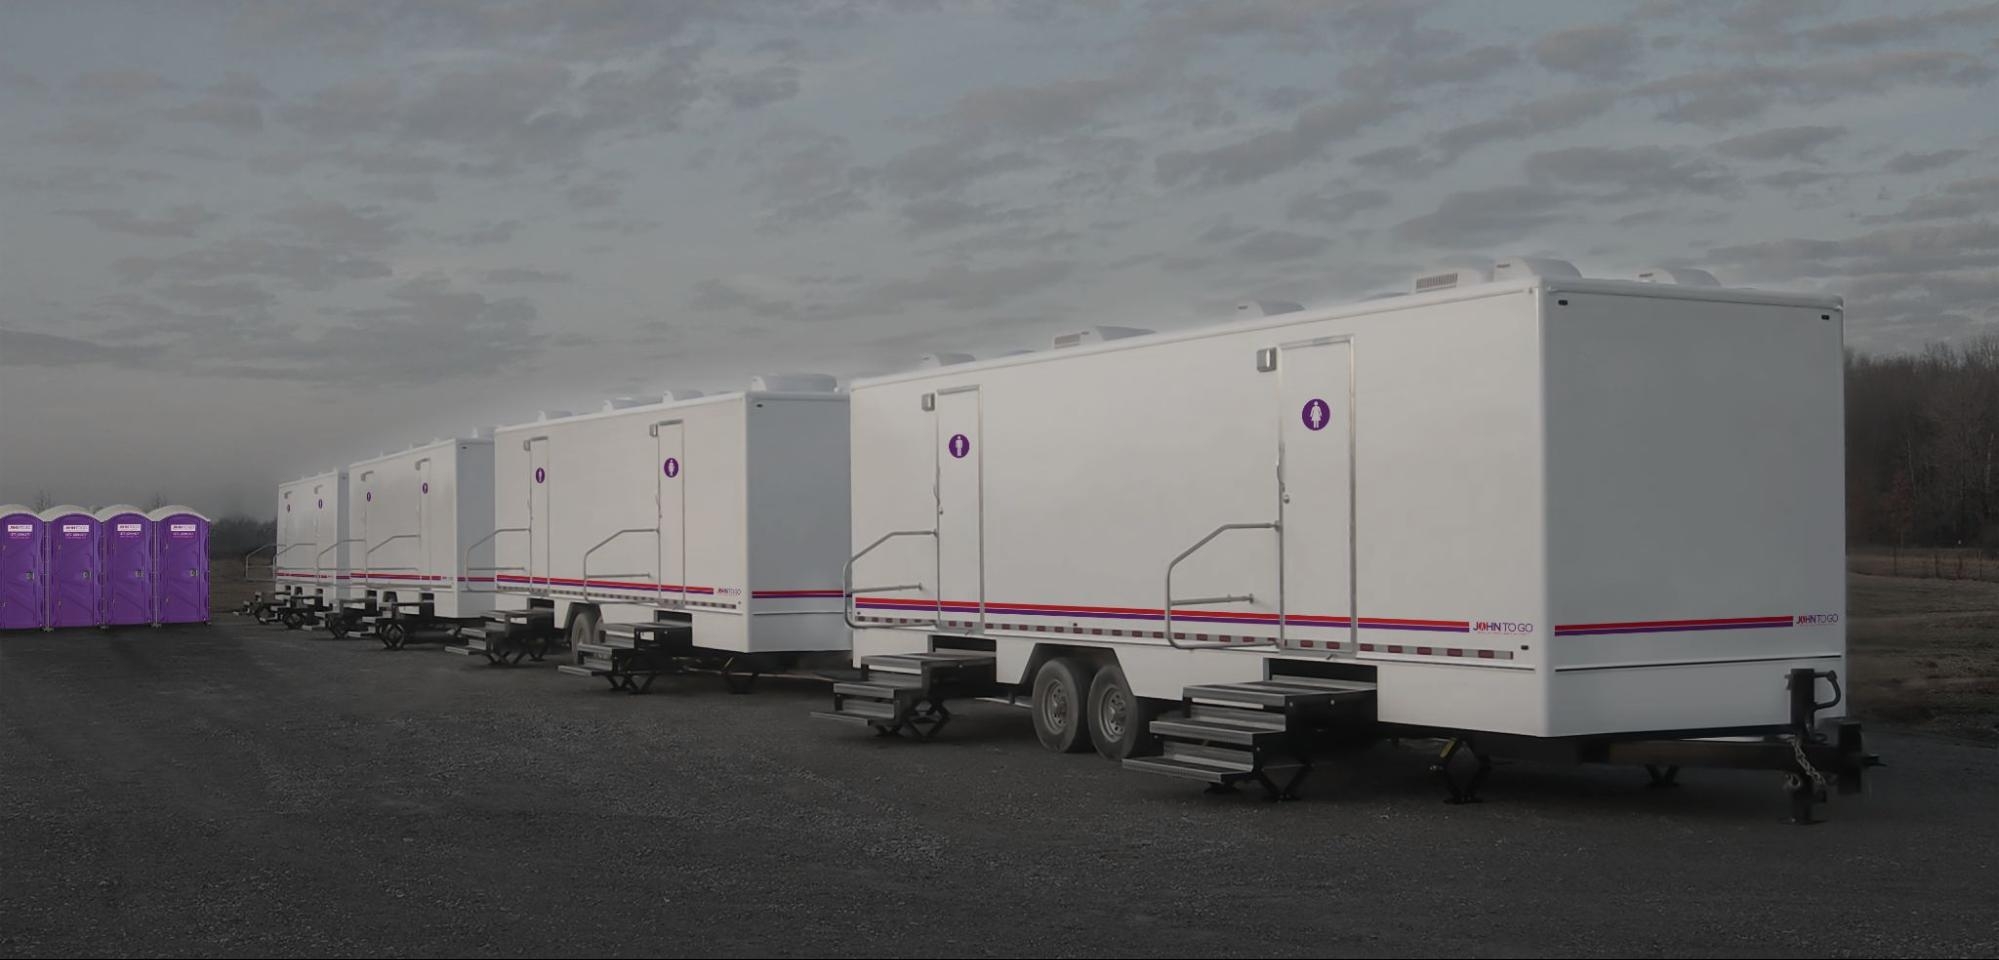 luxury trailers and porta potties for film sets